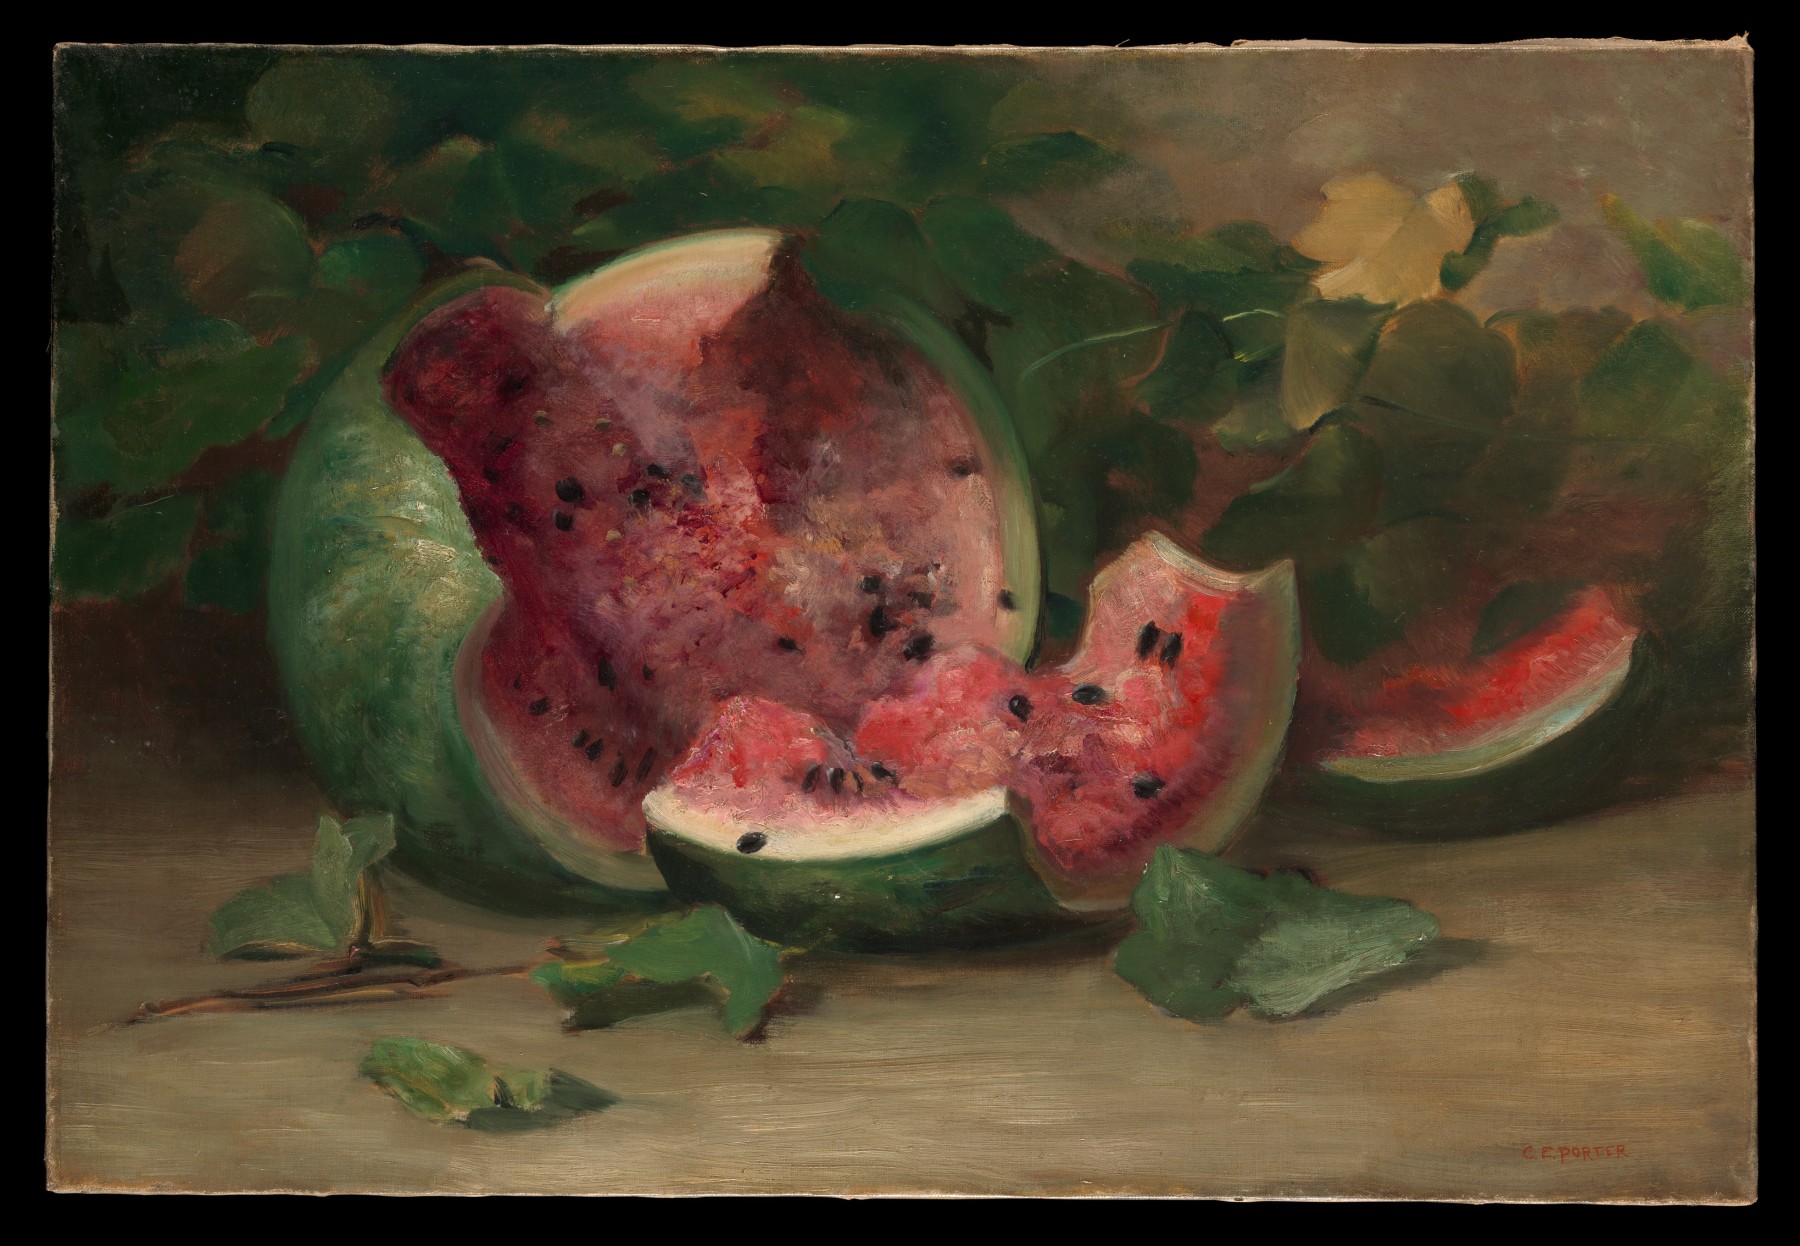 Charles Ethan Porter (1847–1923) Untitled (Cracked Watermelon), ca. 1890 American, oil on canvas; 19 1/8 × 28 3/16 in. (48.6 × 71.6 cm) The Metropolitan Museum of Art, New York, Purchase, Nancy Dunn Revocable Trust, 2015 (2015.118) http://www.metmuseum.org/Collections/search-the-collections/677910